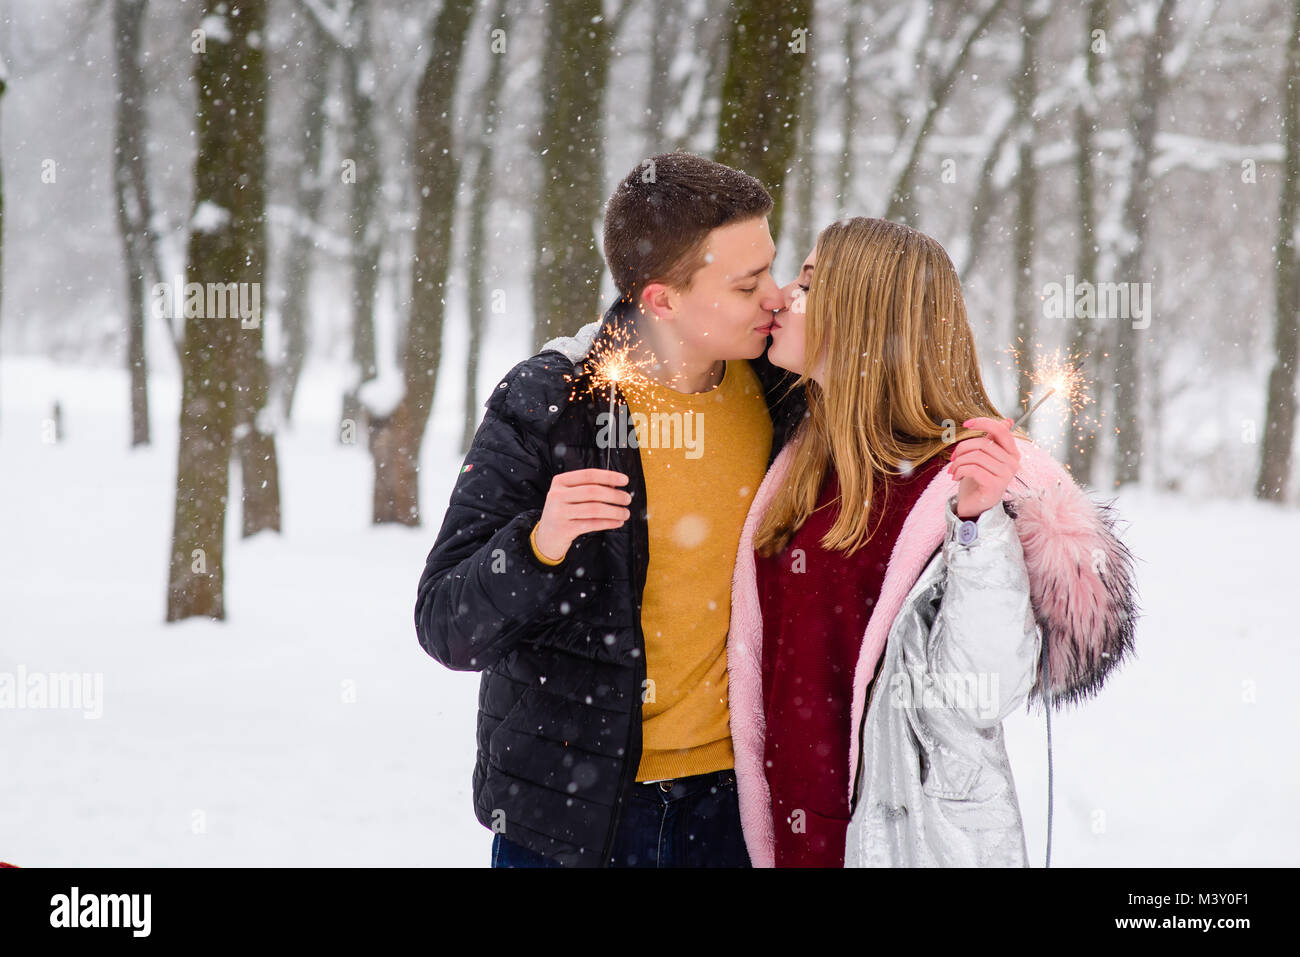 Romantic kiss during snowfall in winter forest. Young couple with bengals outdoors. Stock Photo